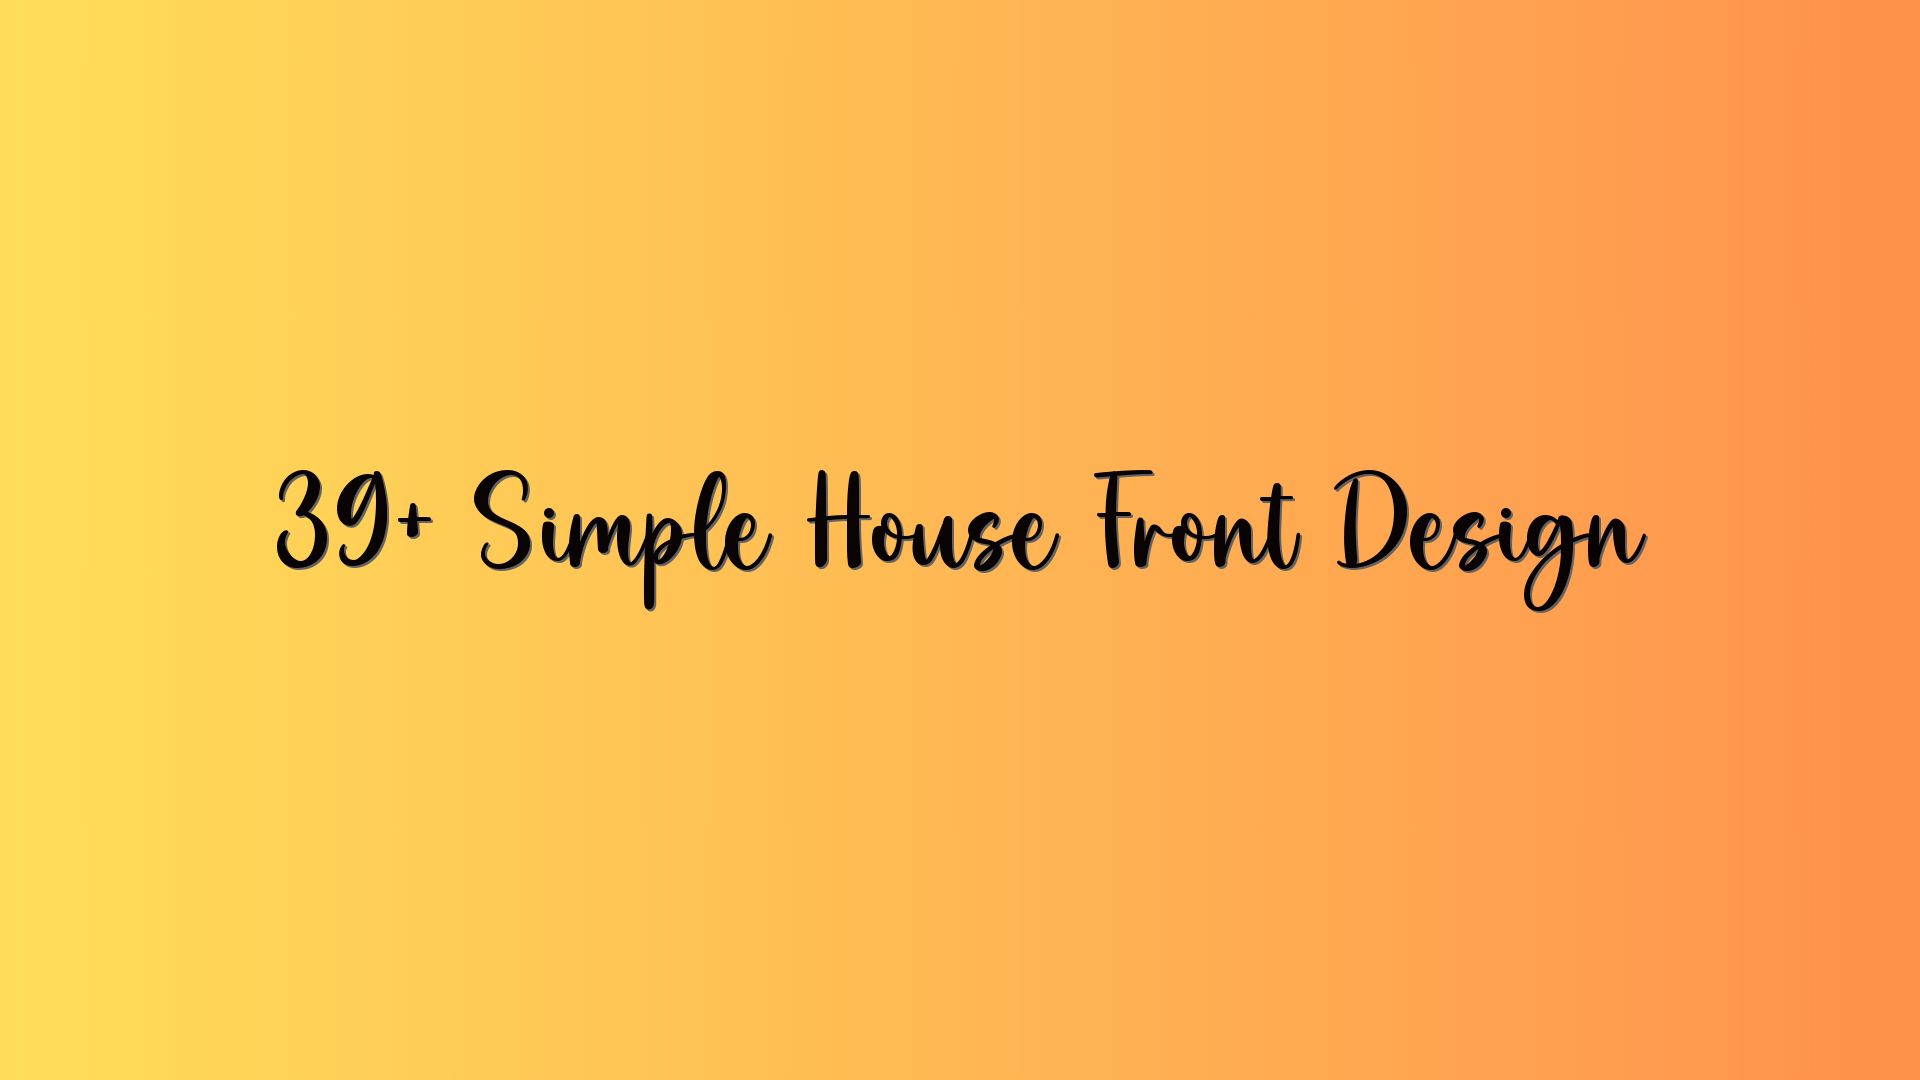 39+ Simple House Front Design